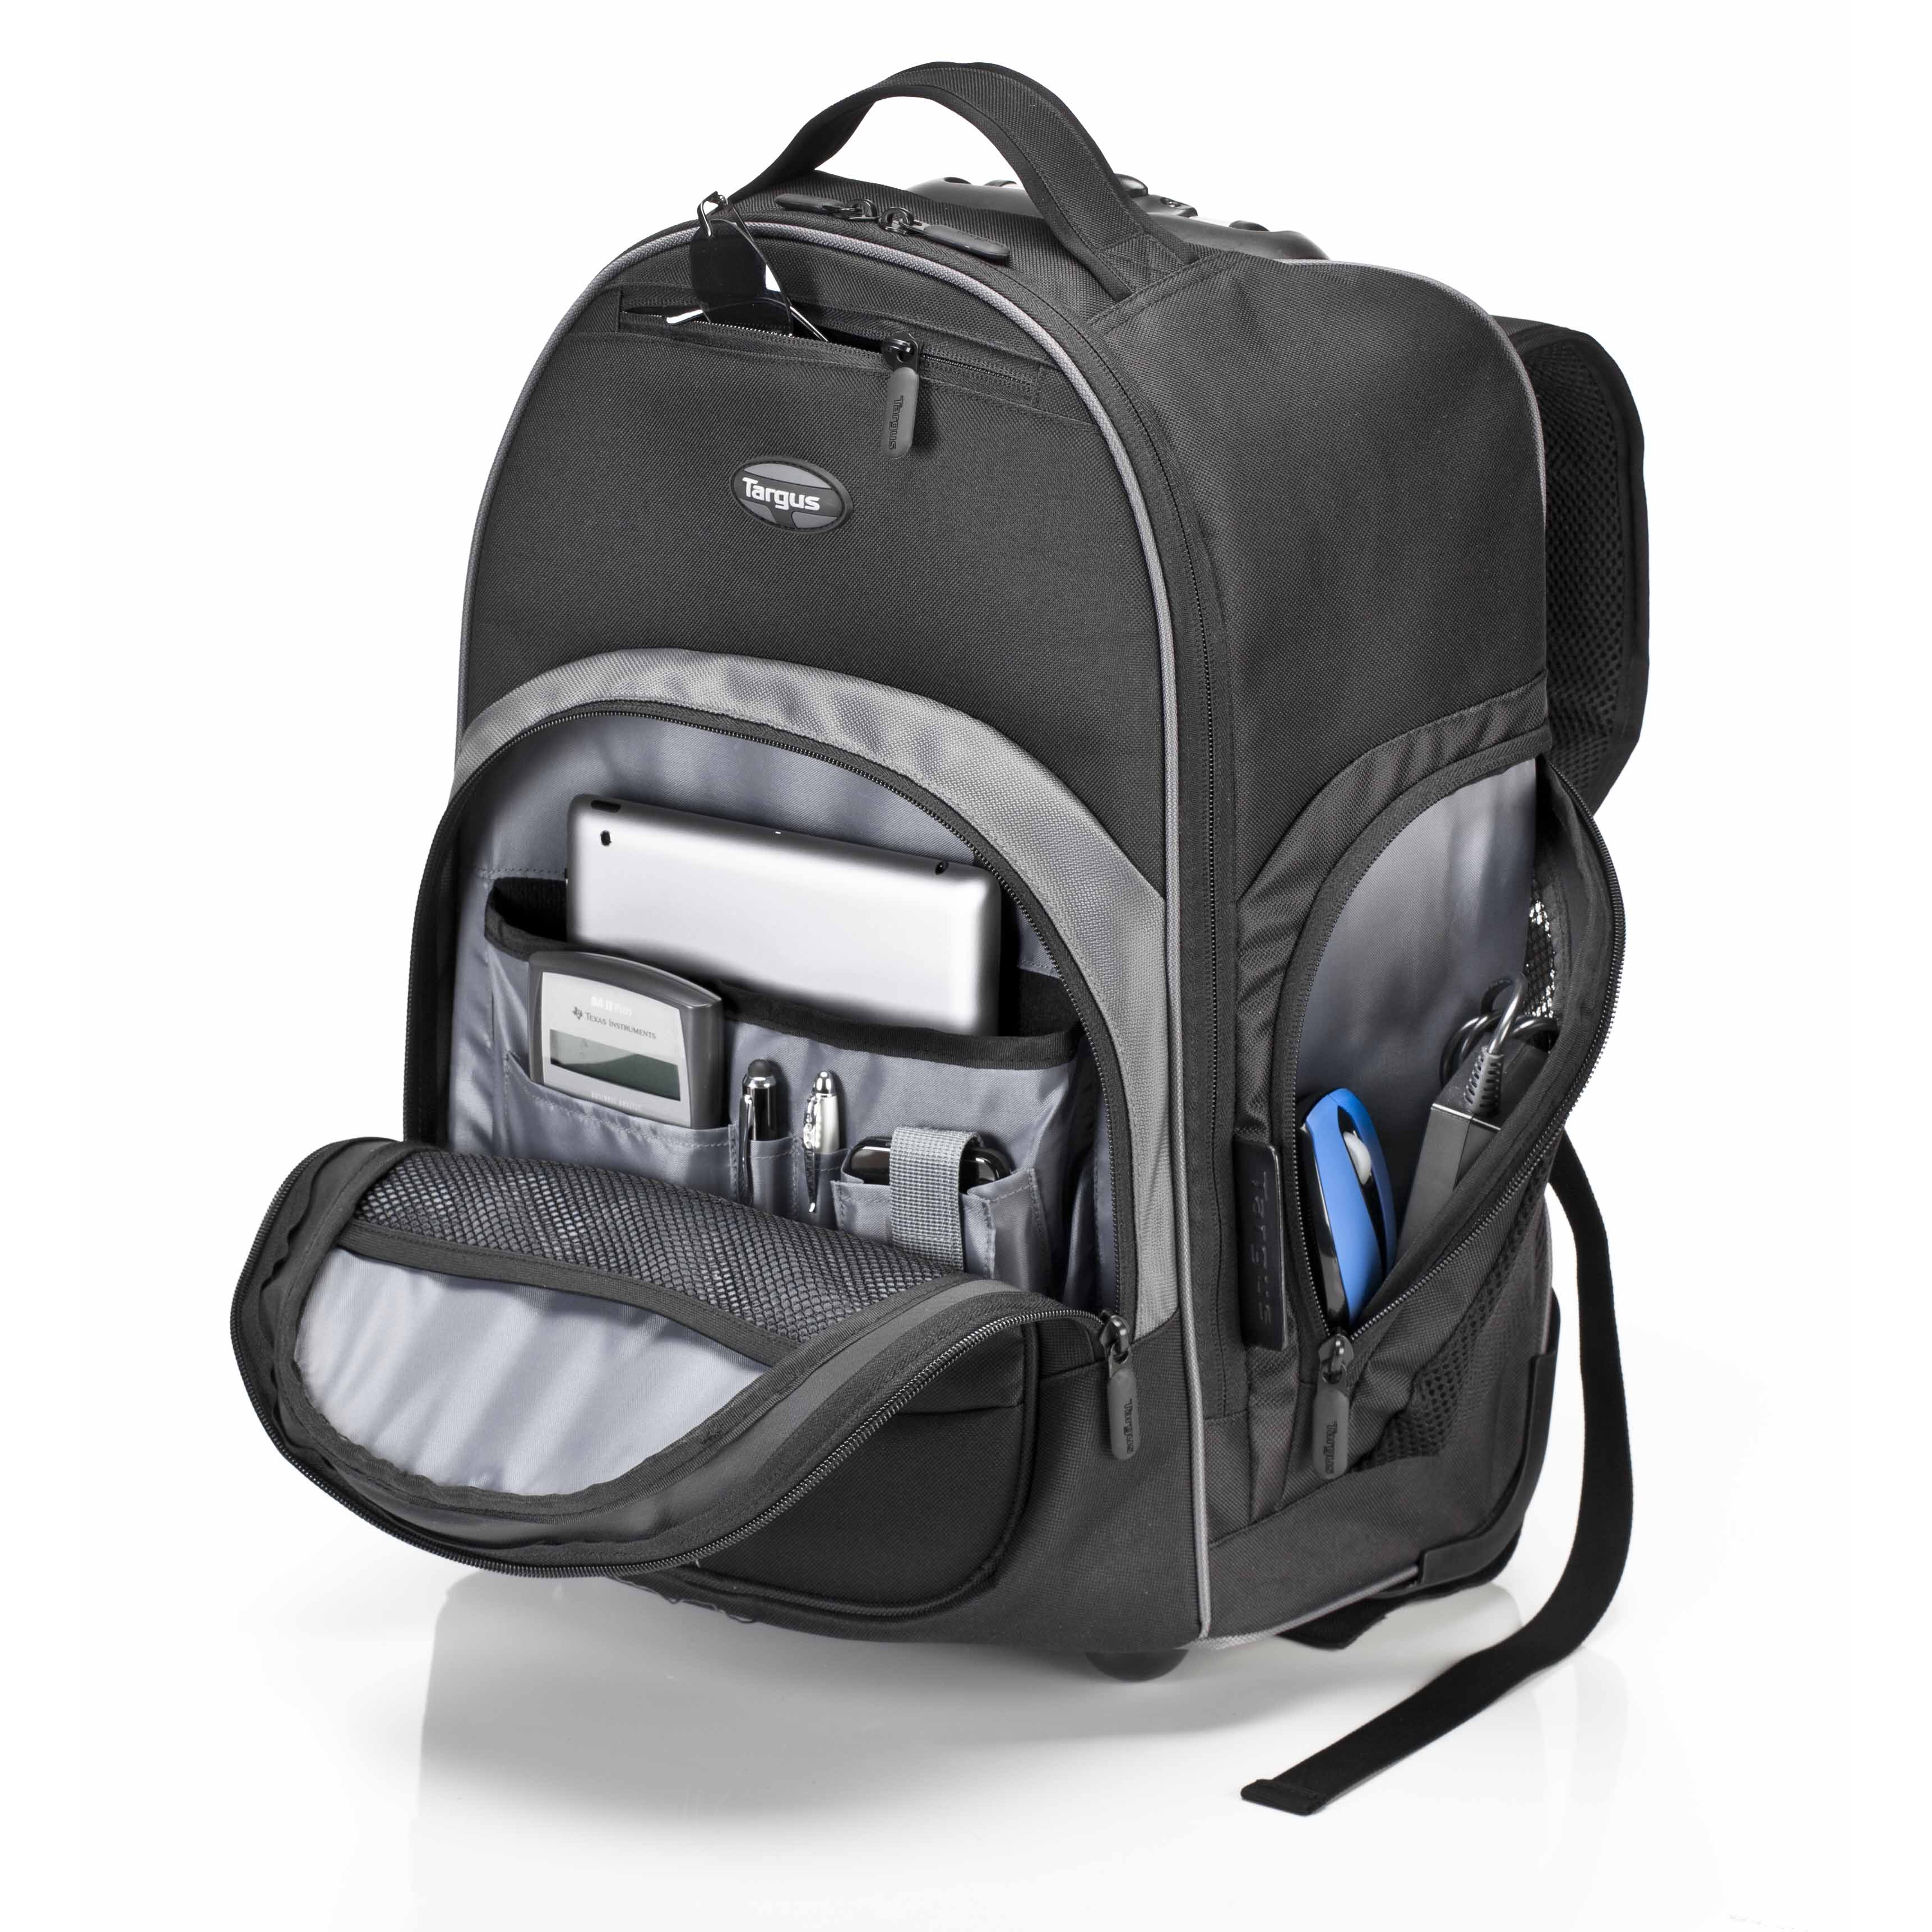 16” Compact Rolling Backpack - TBR015US - Black: Rollers: Targus